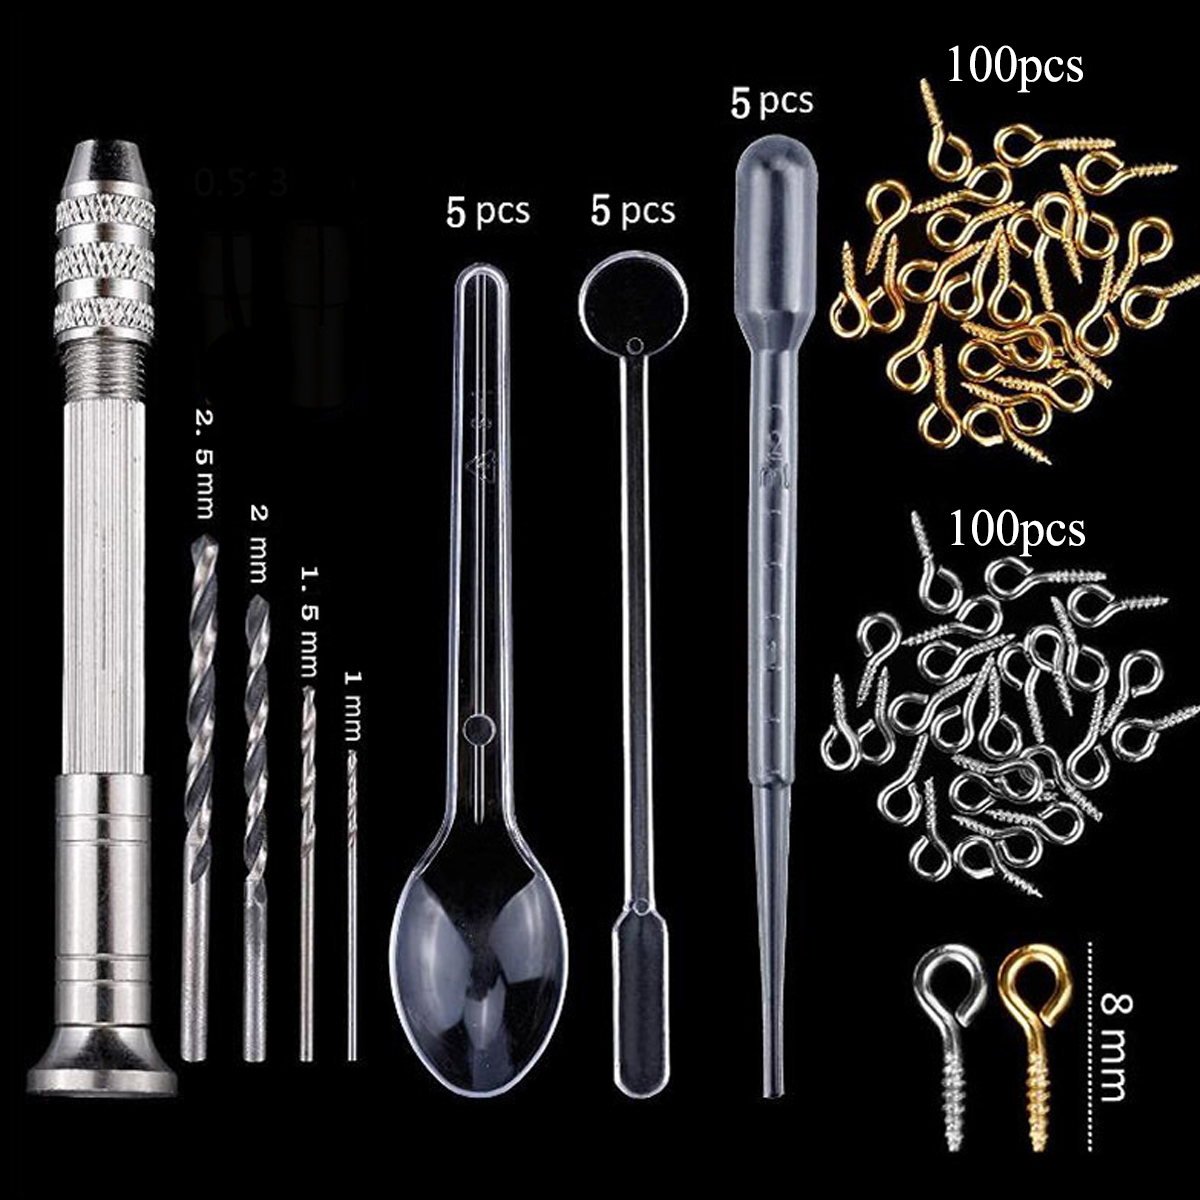 285Pcs-Resin-Casting-Molds-Kit-Silicone-Making-Jewelry-DIY-Pendant-Craft-Mould-Tools-Kit-1808480-8